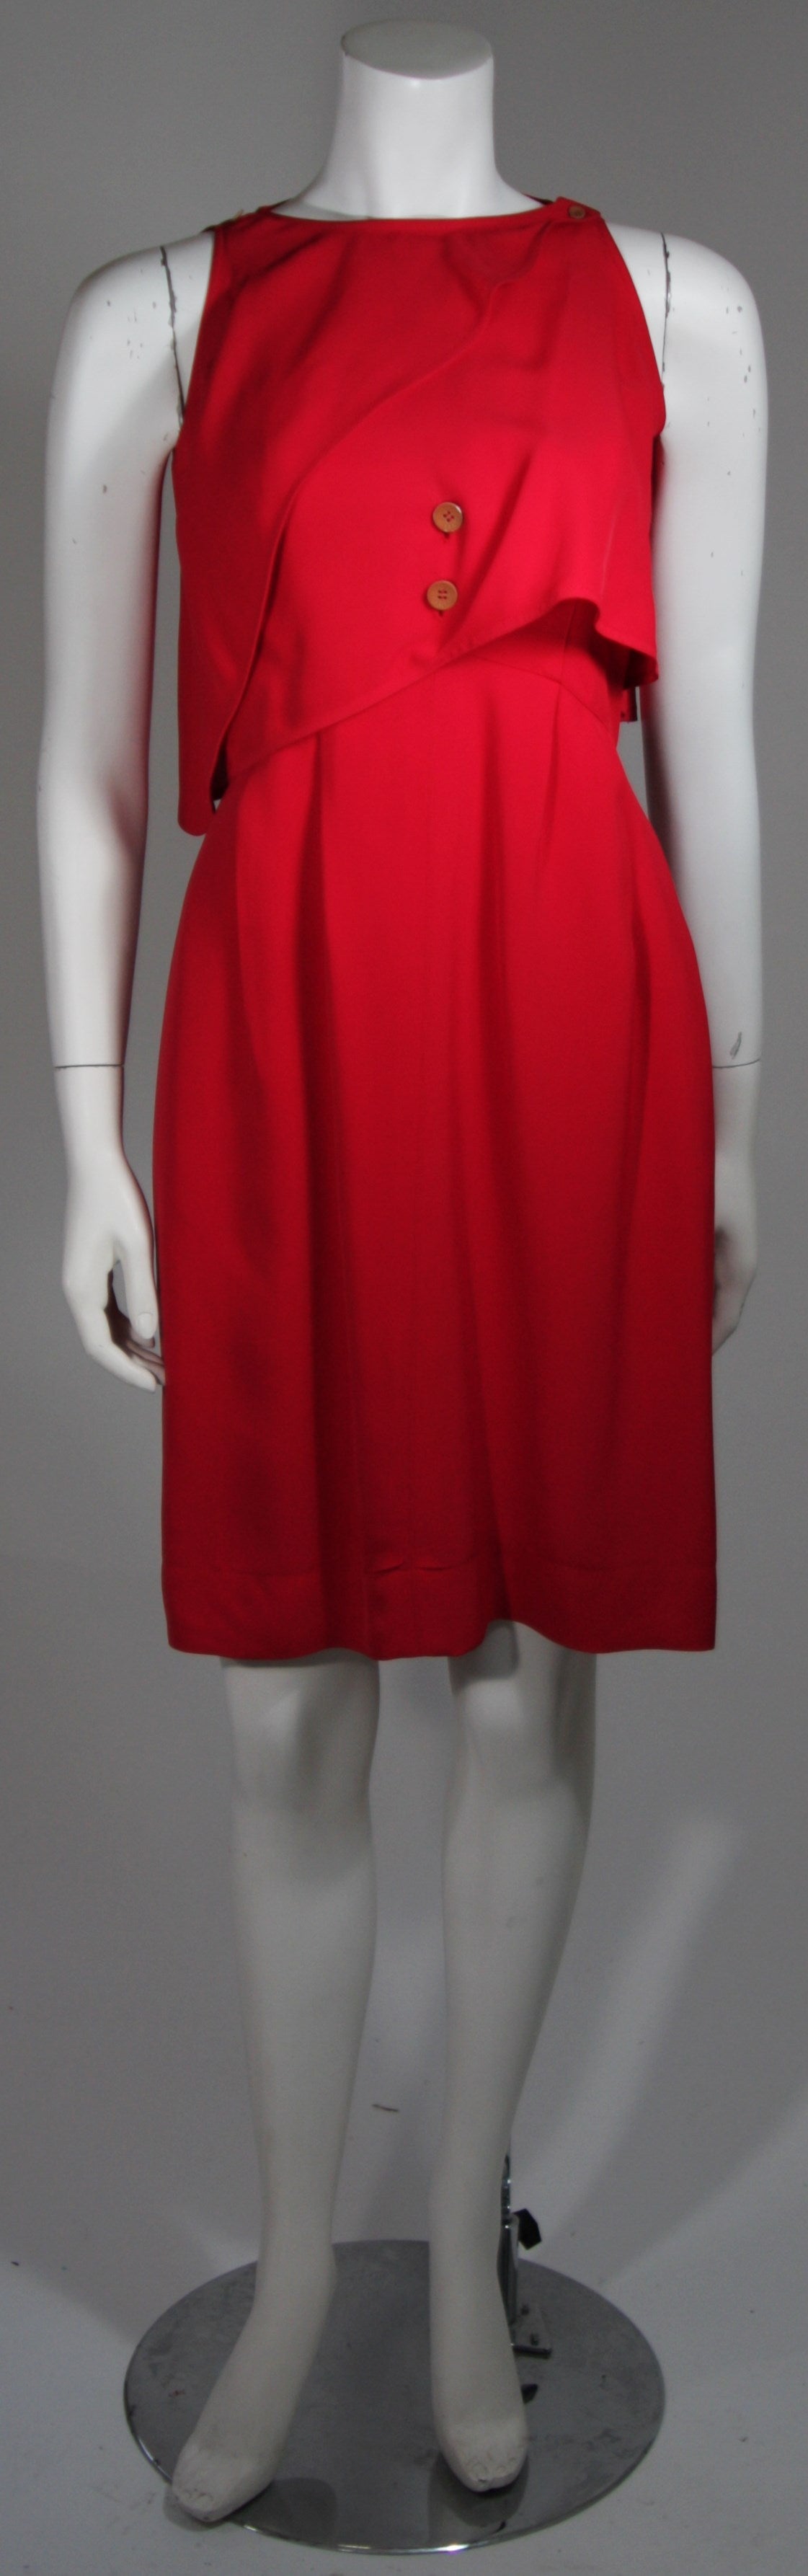 This Fendi dress is composed of a vibrant red fabric. The dress is designed in a fashion to accentuate the use of buttons, one can remove the caplet for a classic strap style dress or let it remain for a flowing effect. There is a zipper closure and